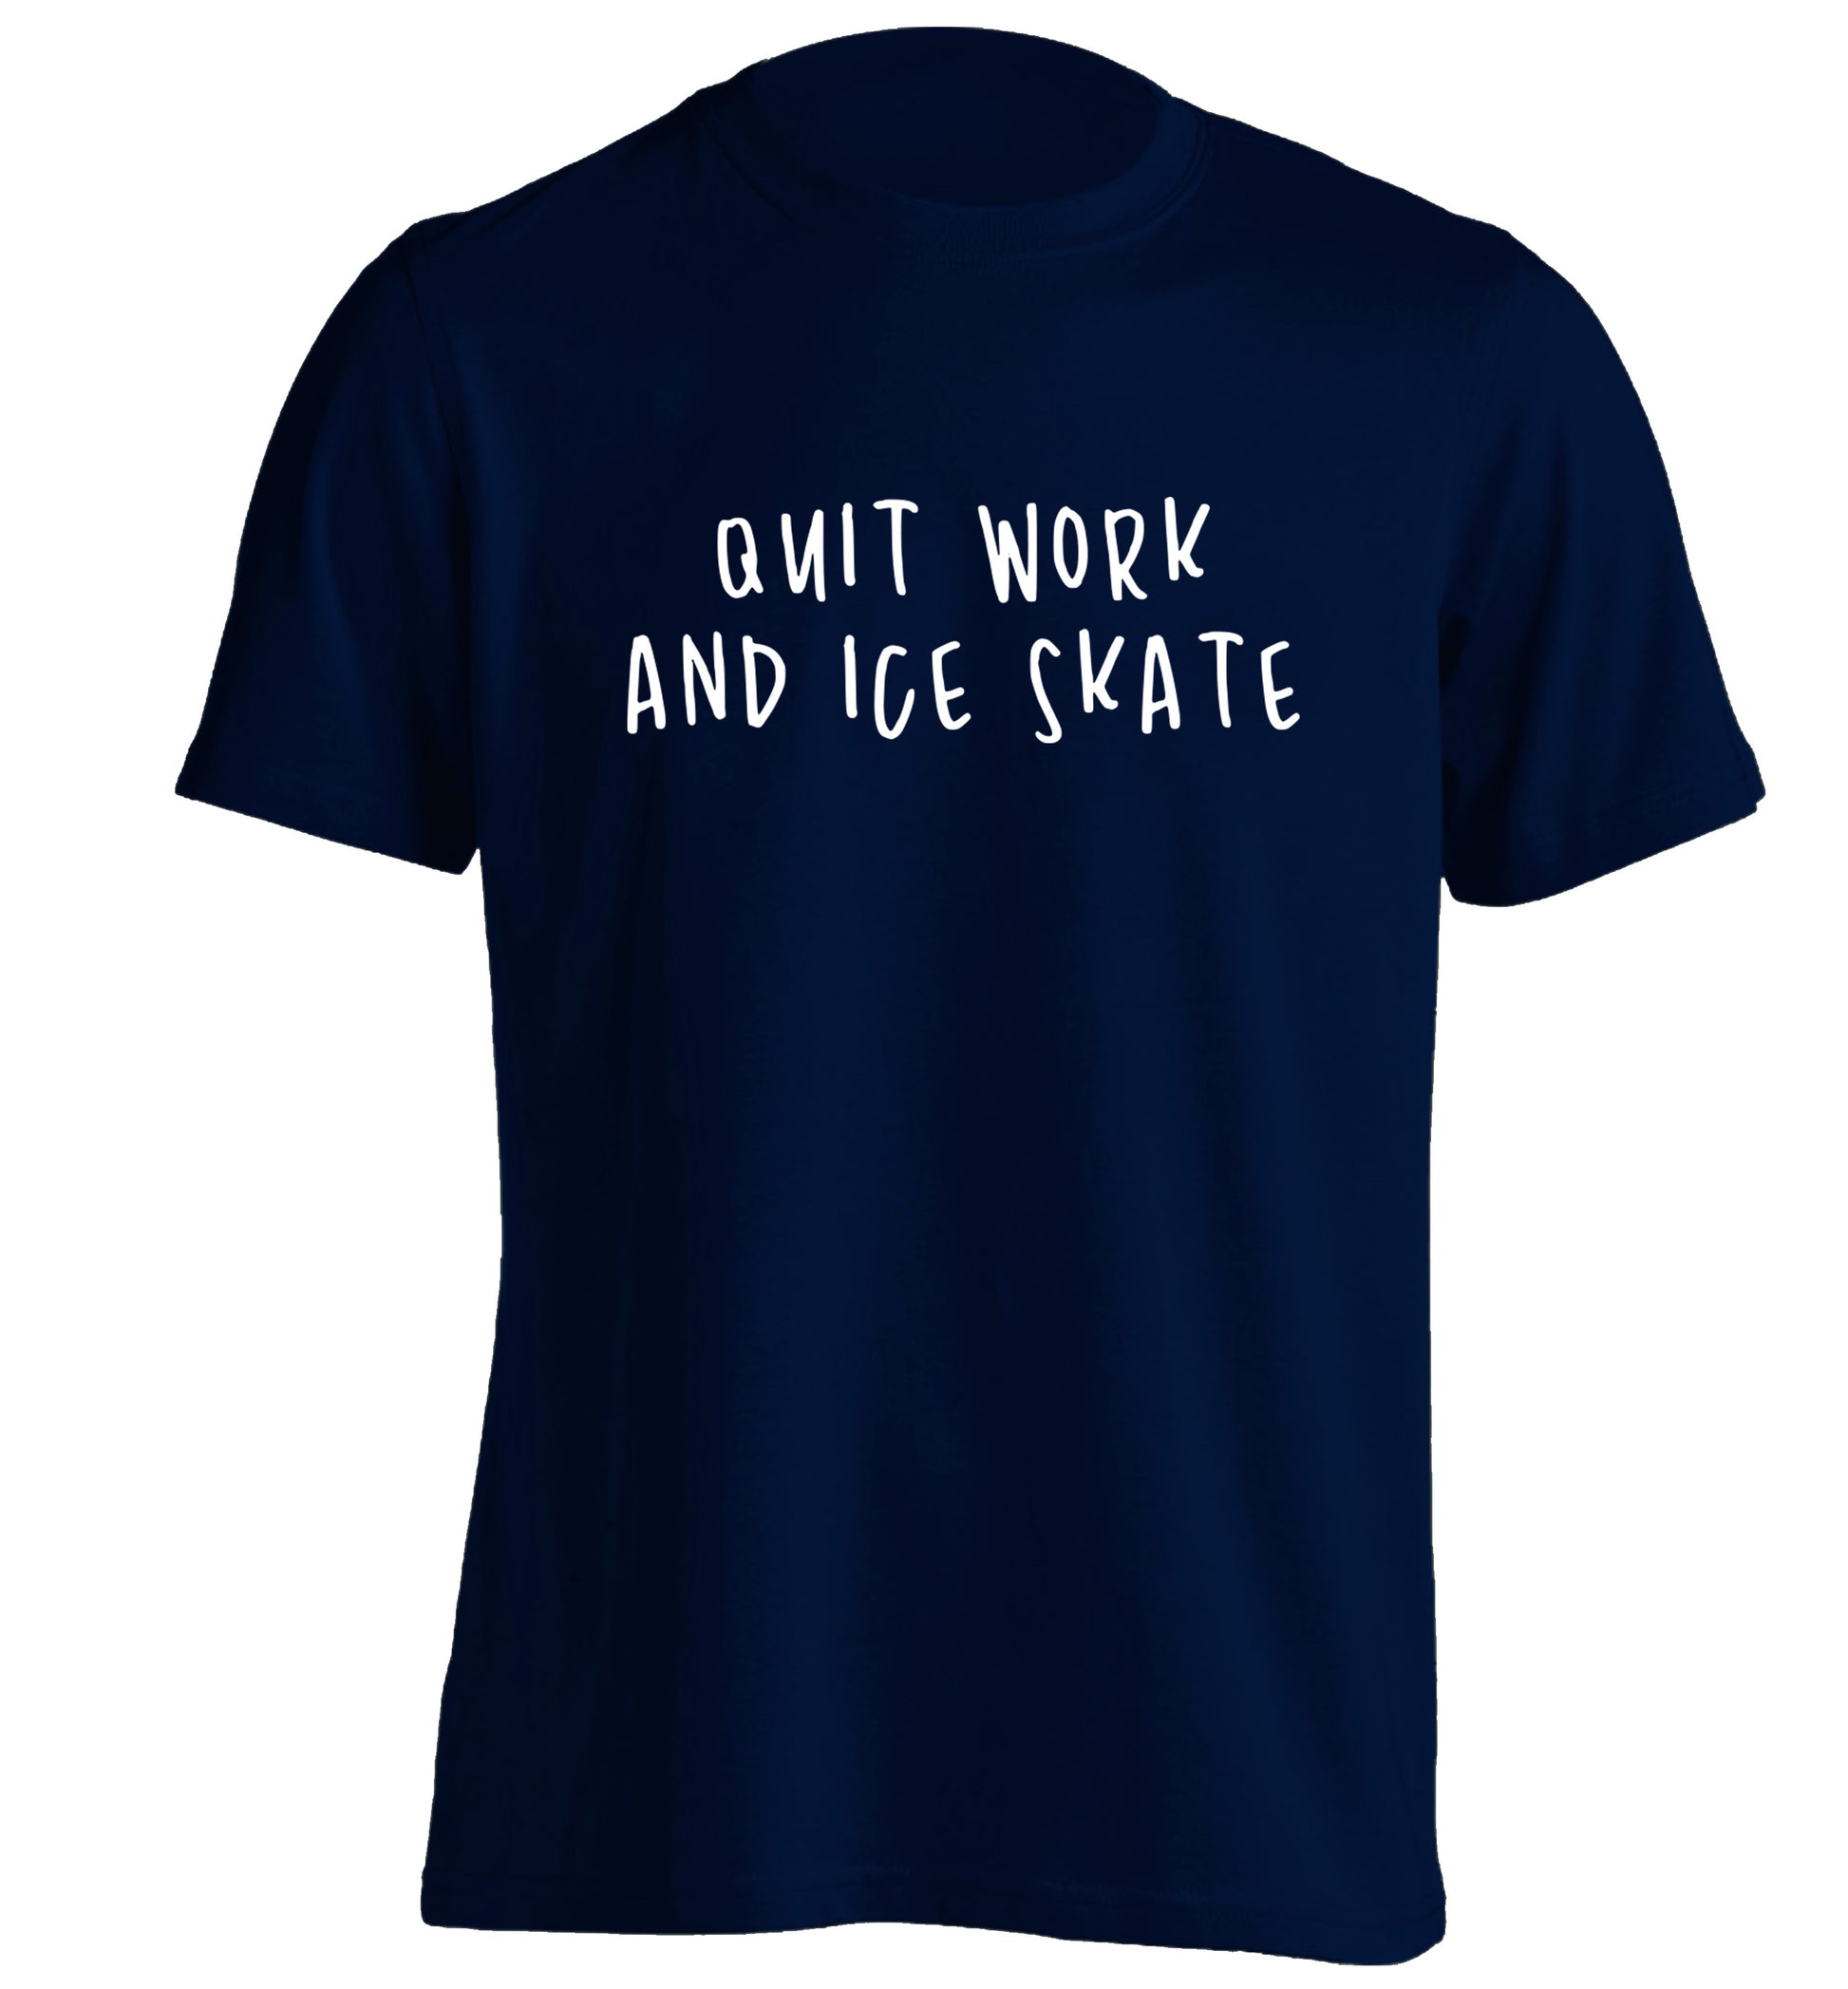 Quit work ice skate adults unisexnavy Tshirt 2XL